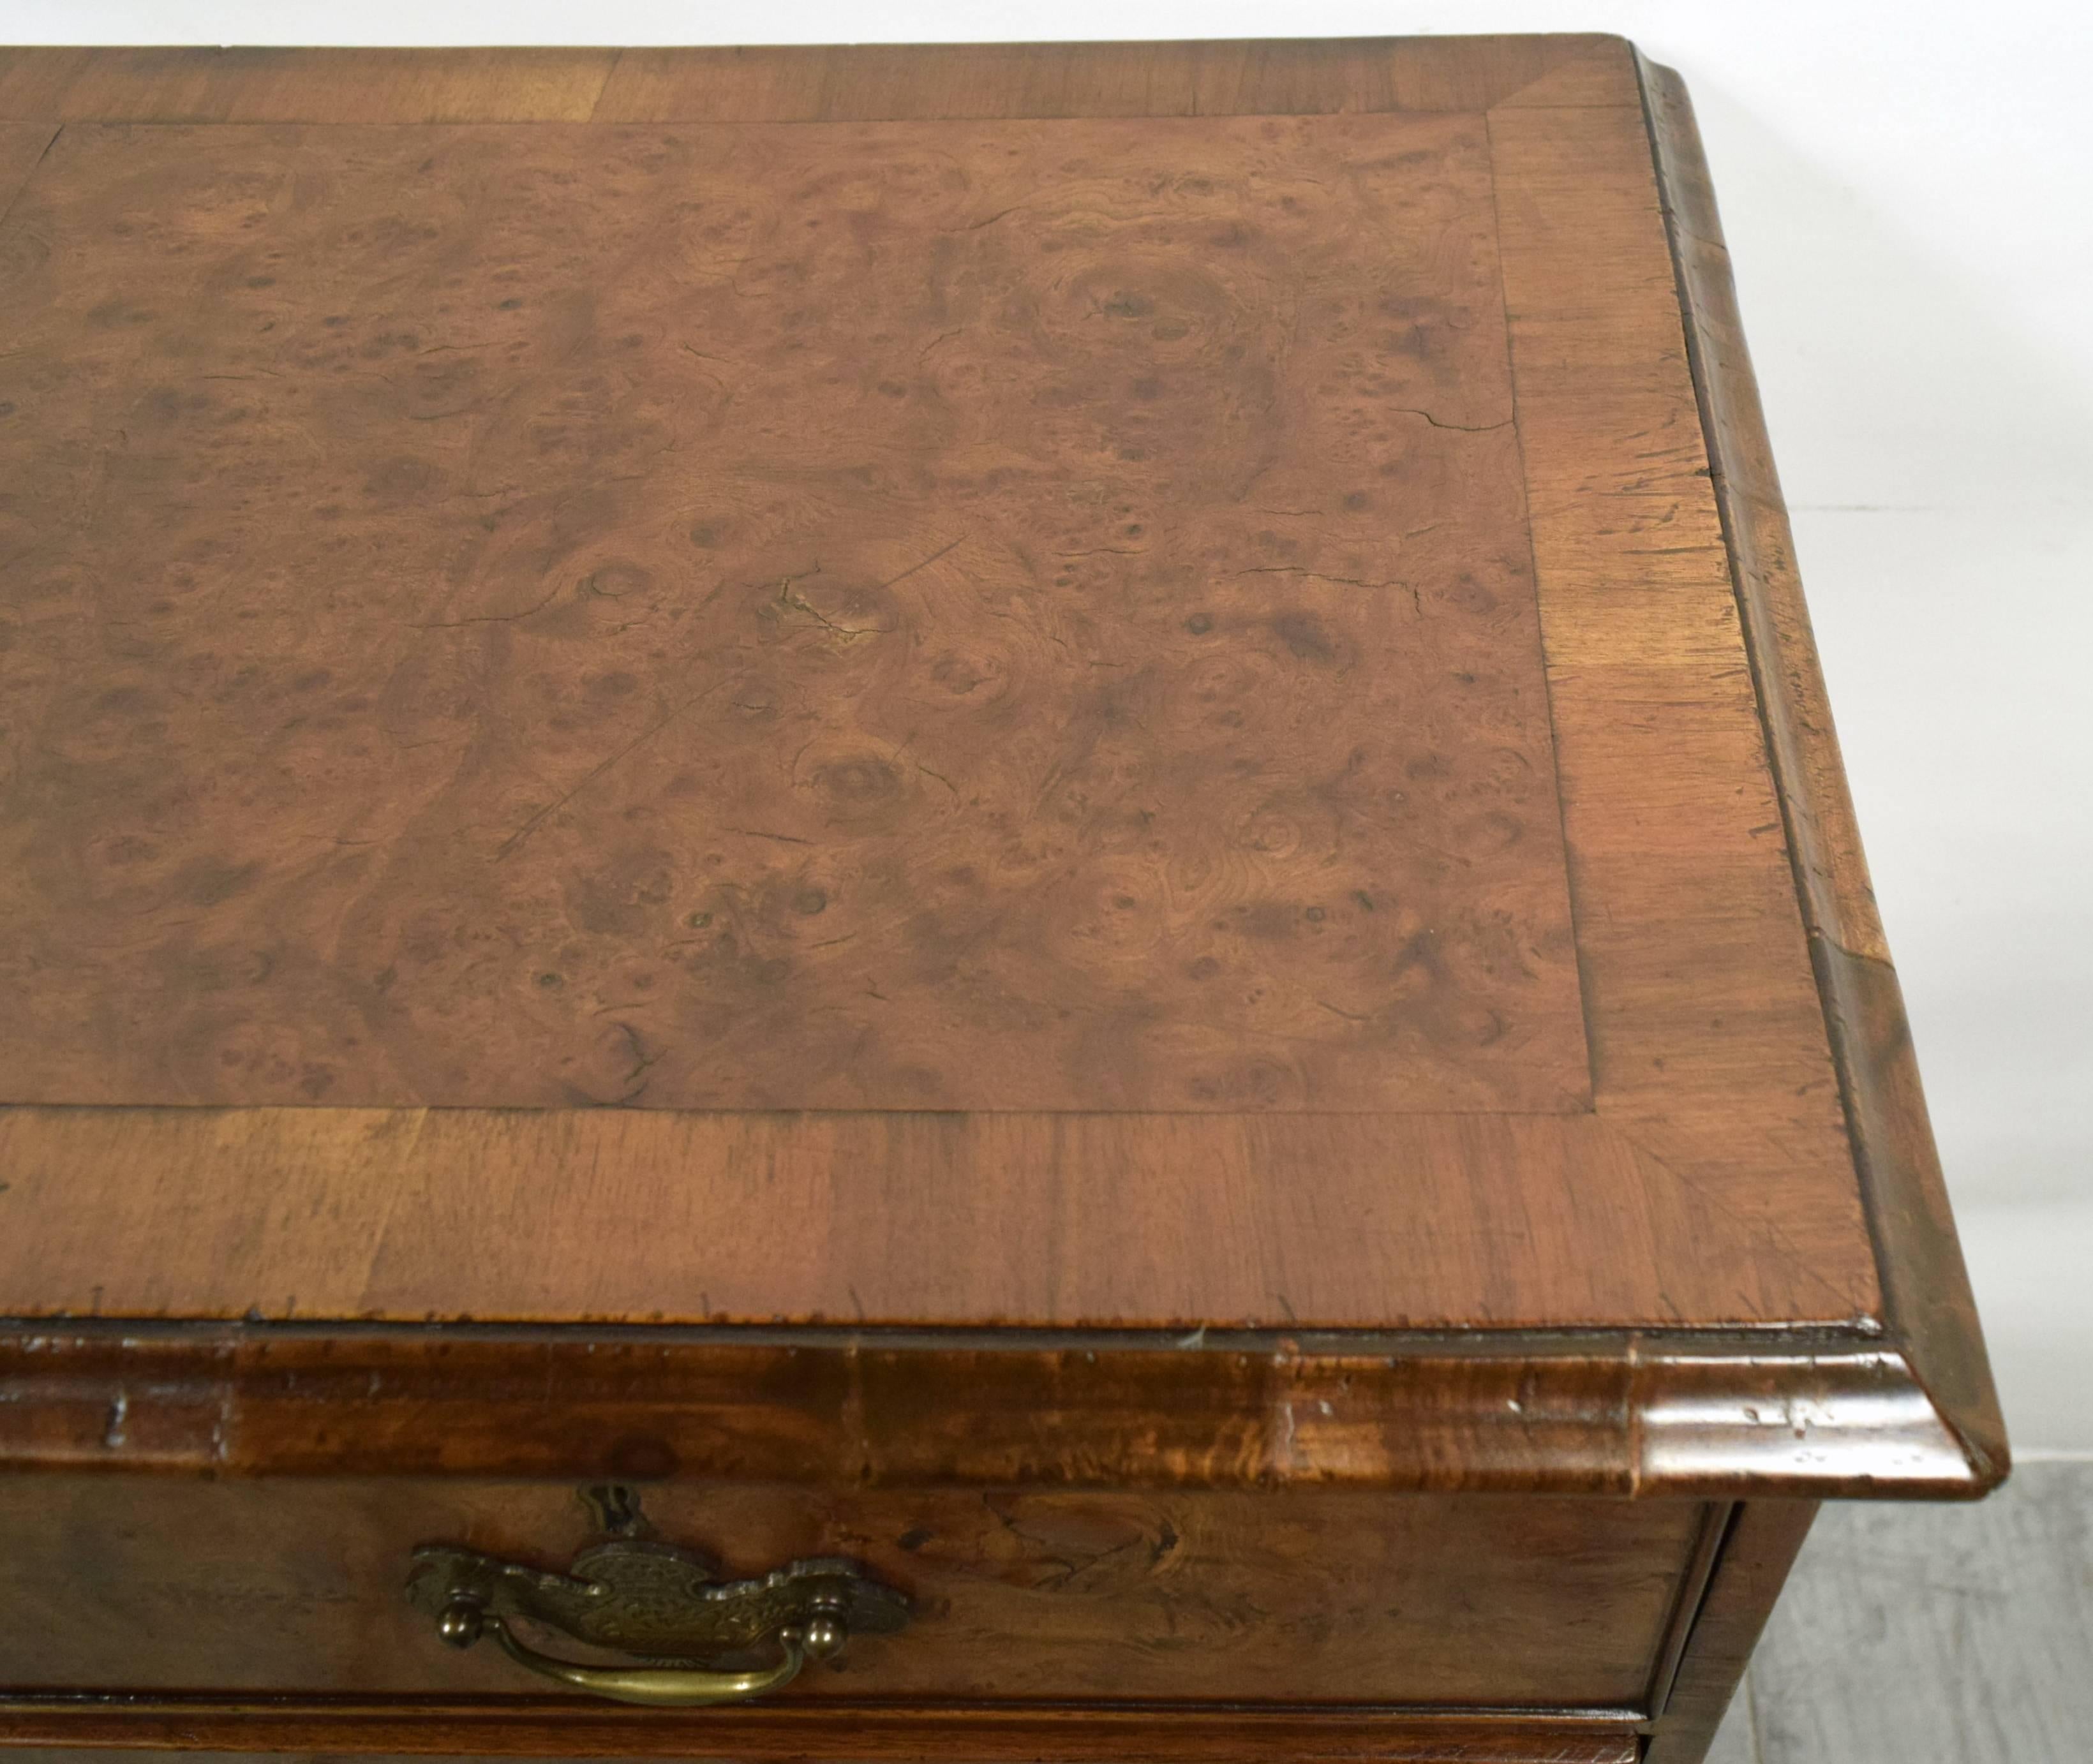 This is a gorgeous late 18th century English George II chest of drawers. It is made from solid wood covered with burl veneers. It has five drawers, two small ones on top and three long ones underneath. It also has shaped bracket feet under a quarter